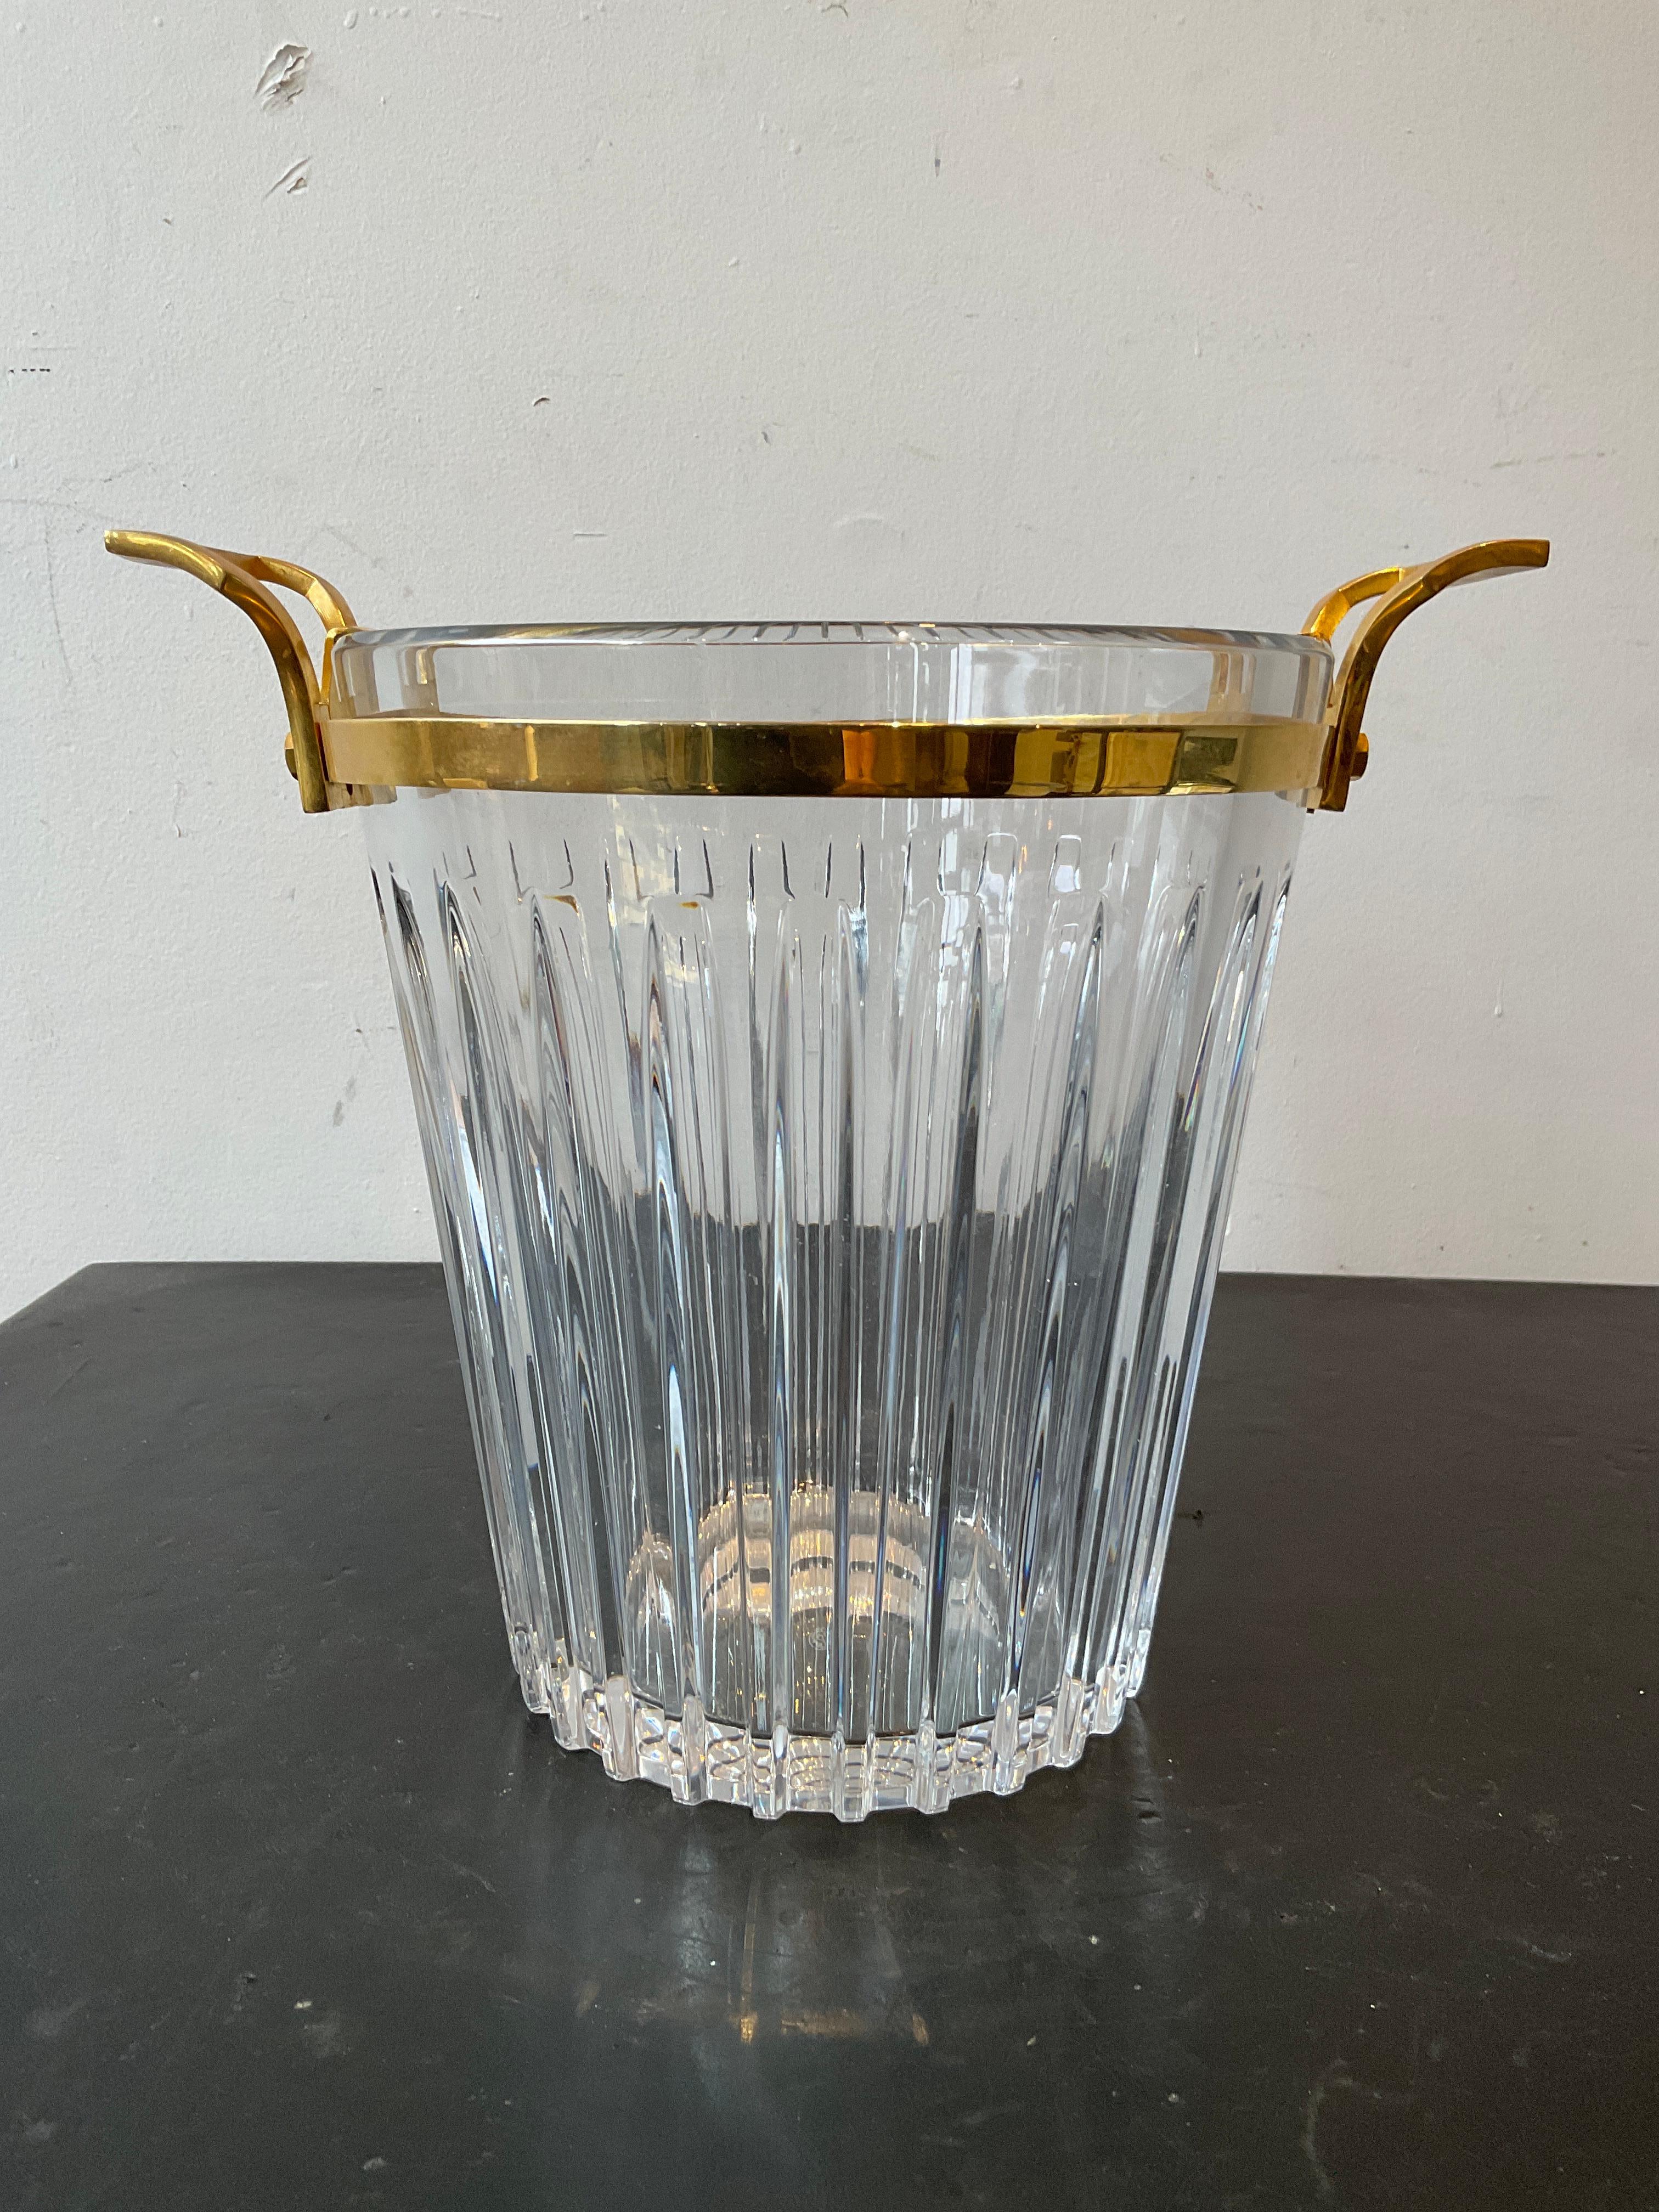 Baccarat champagne cooler with removable ring of handles. Marked Baccarat on bottom.